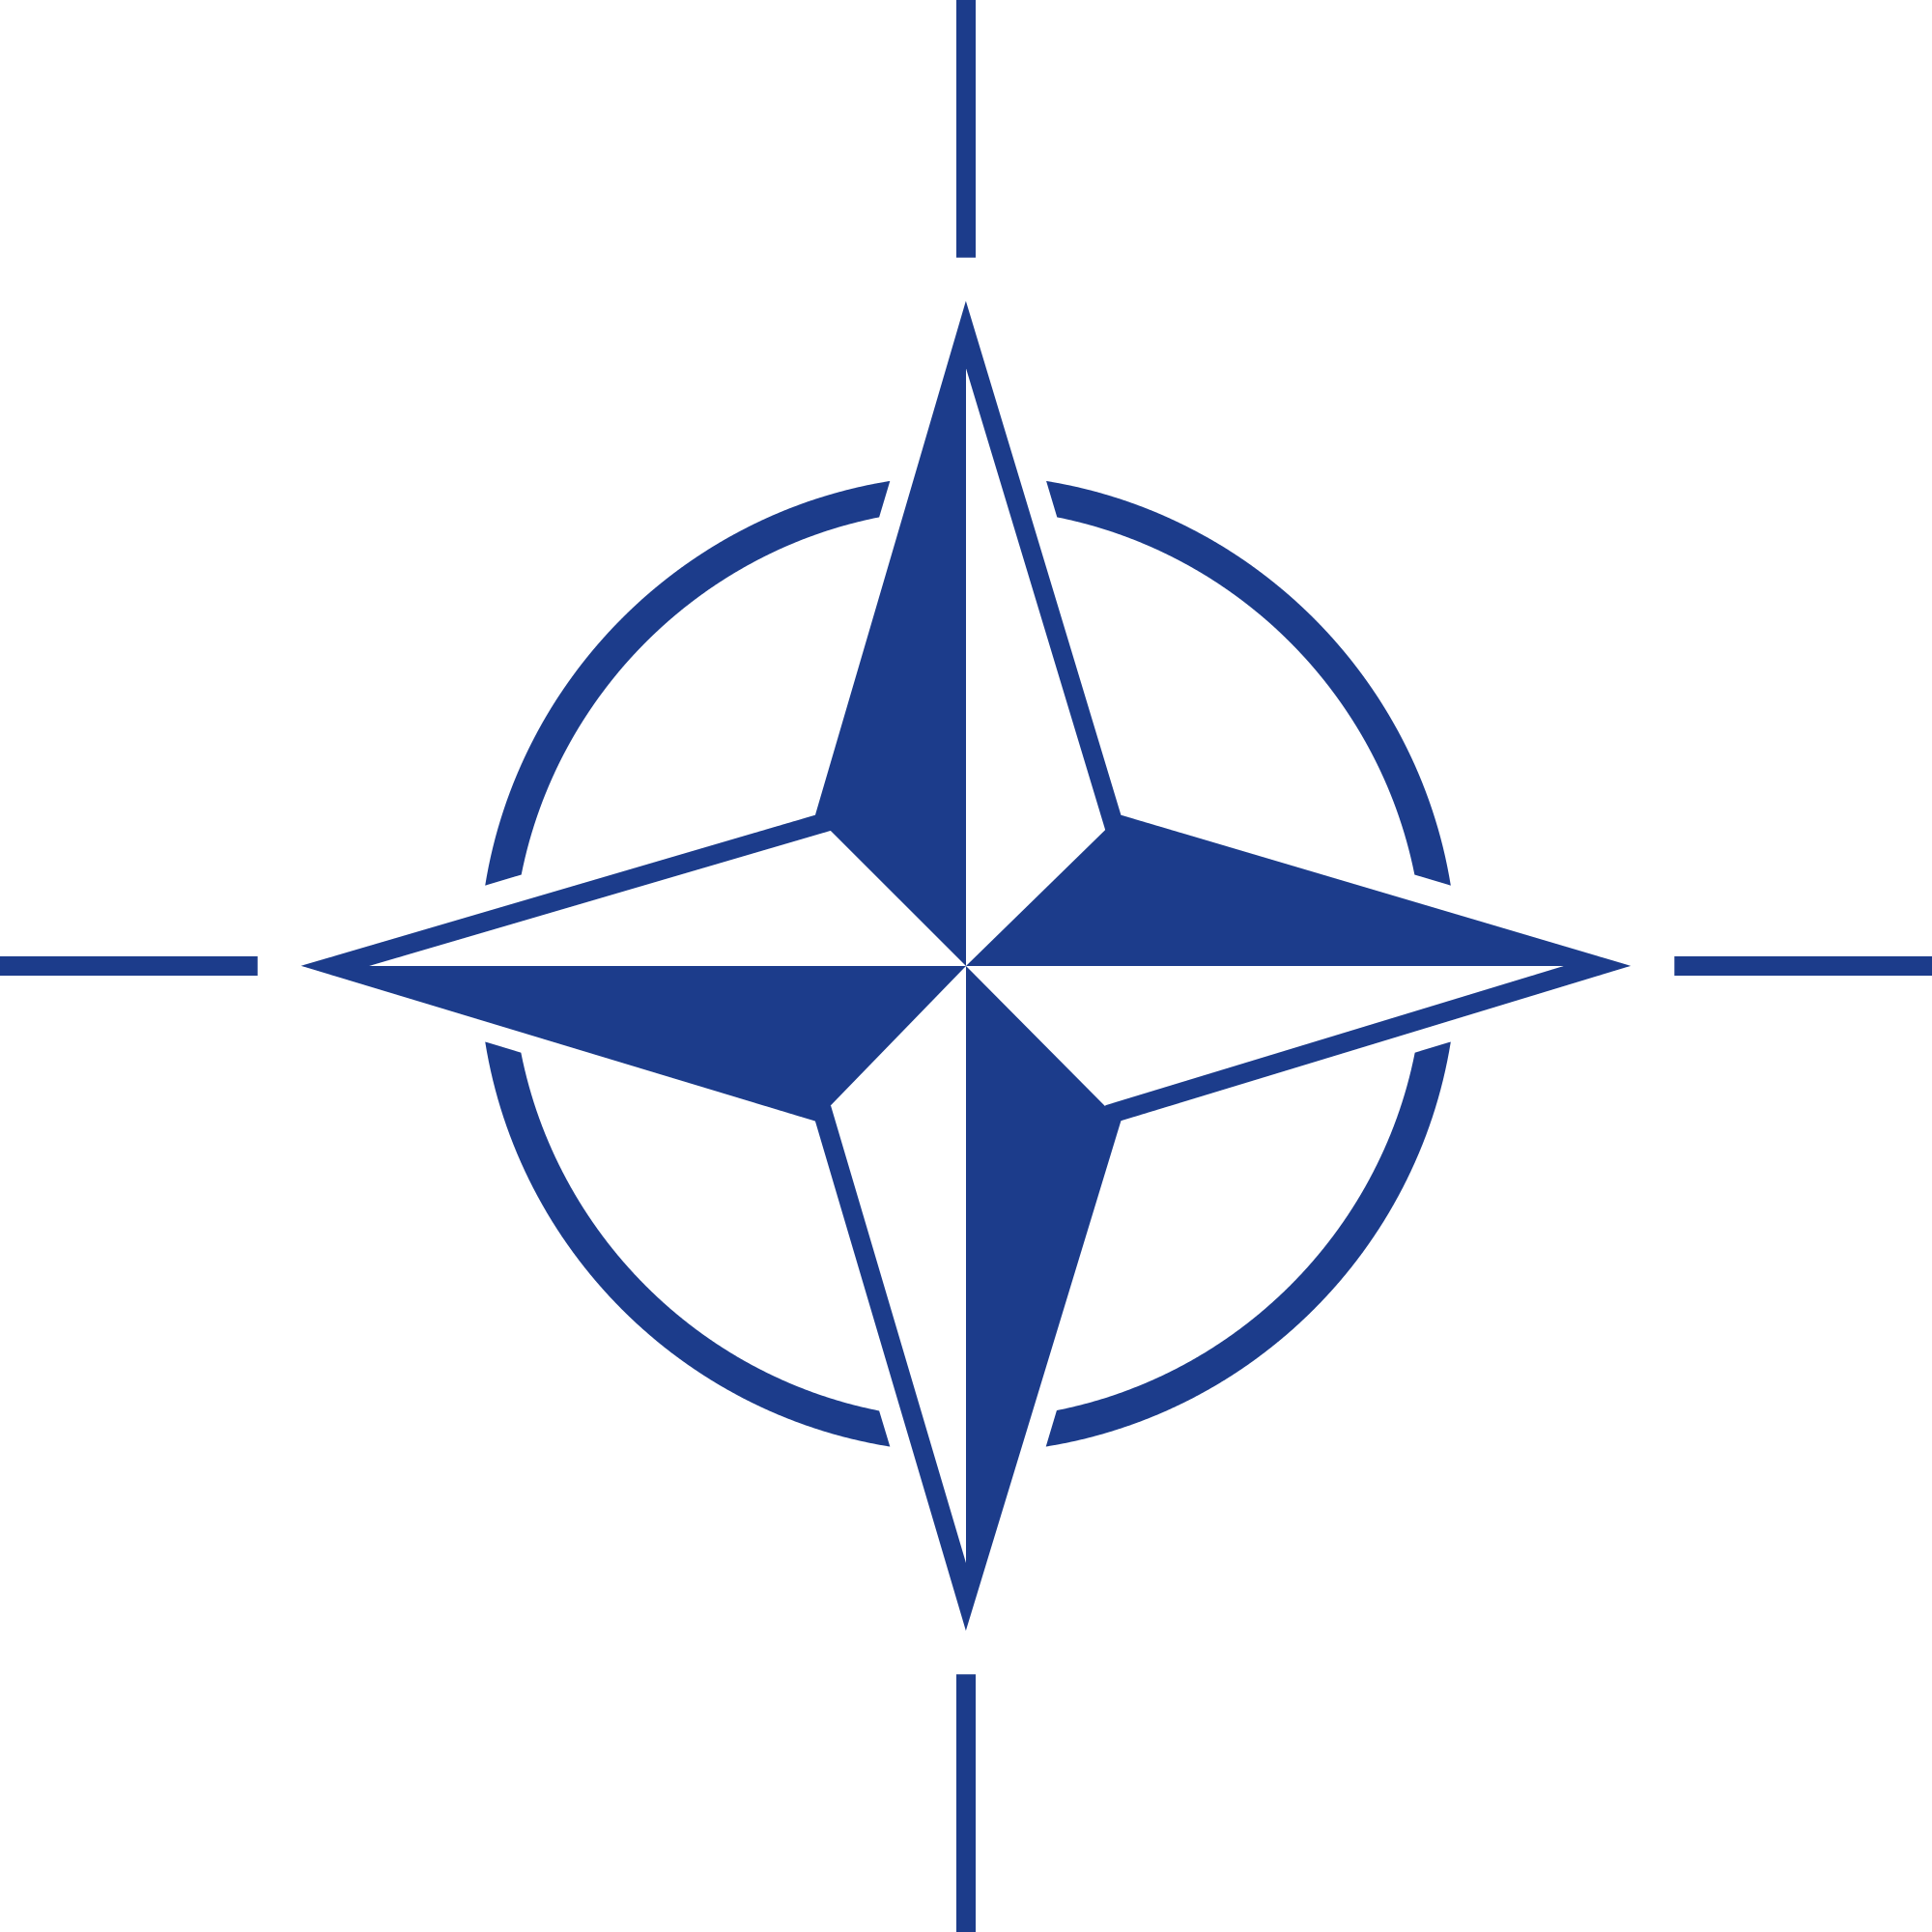 Blue Compass Logo - File:Blue compass rose.svg - Wikimedia Commons